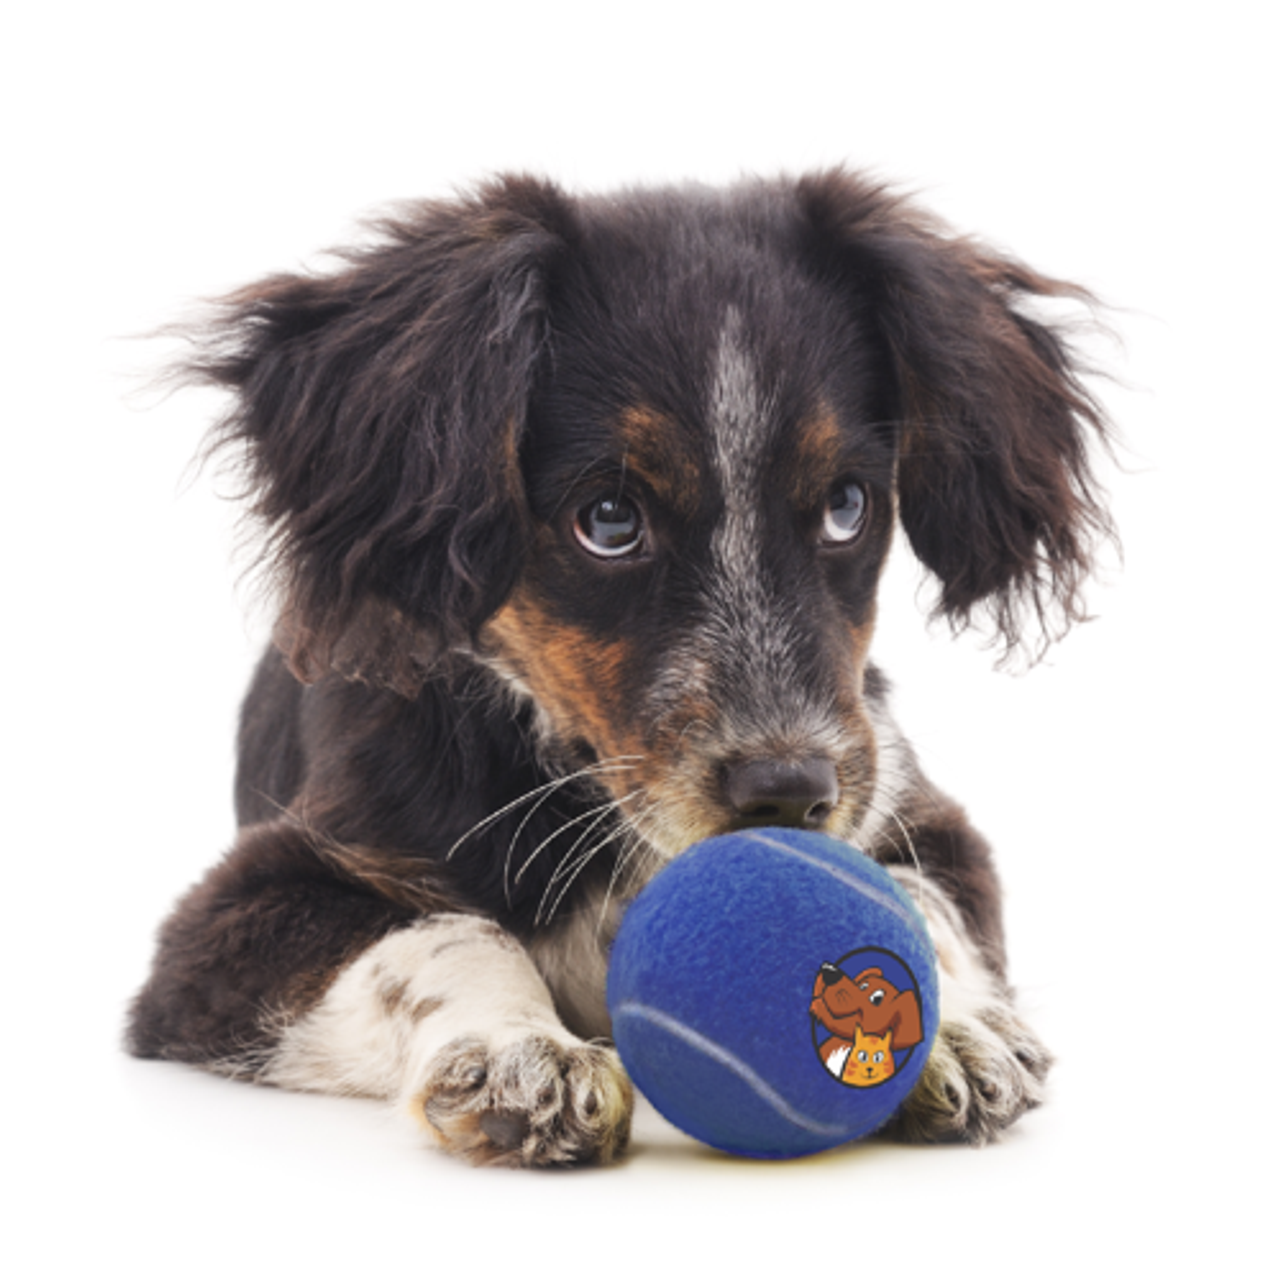 Full Color Imprint Promotional Tennis Balls for Dogs Promotional Dog Toys